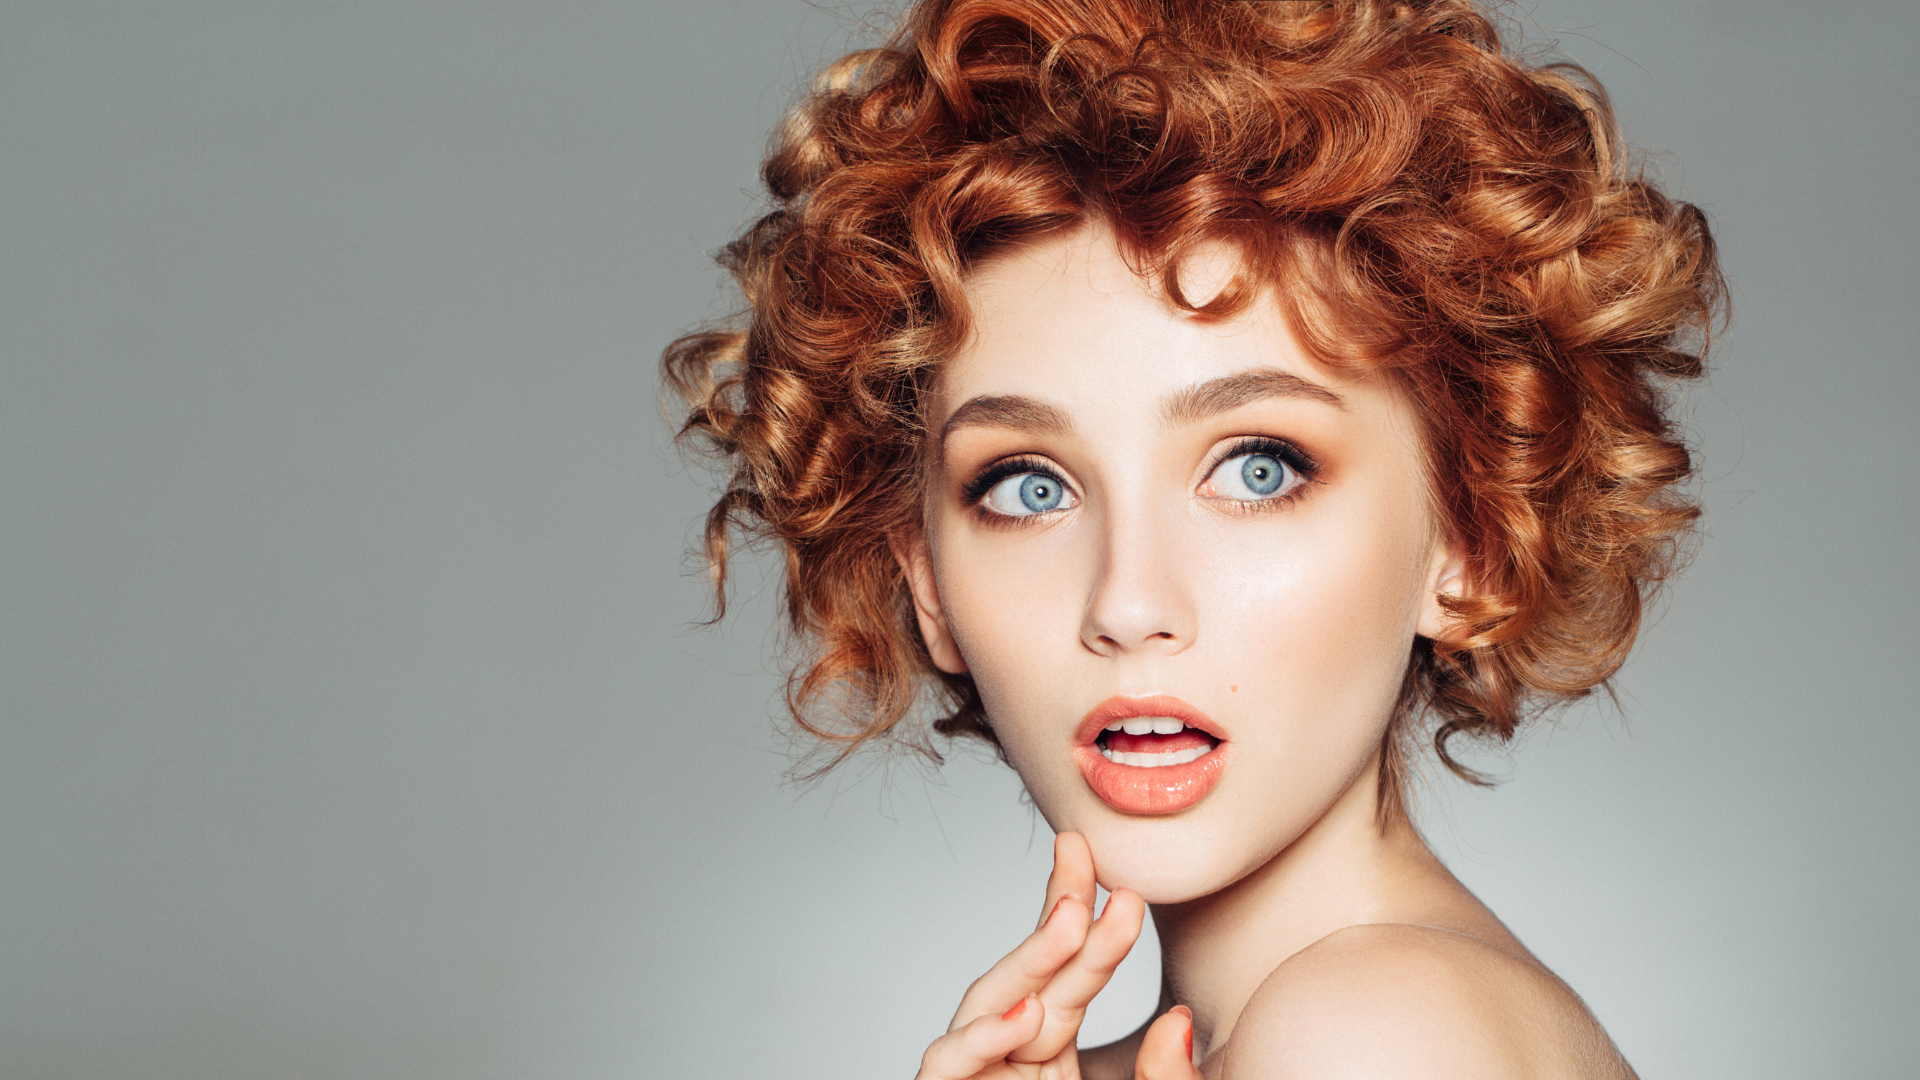 How to Take Care of Short Curly Red Hair